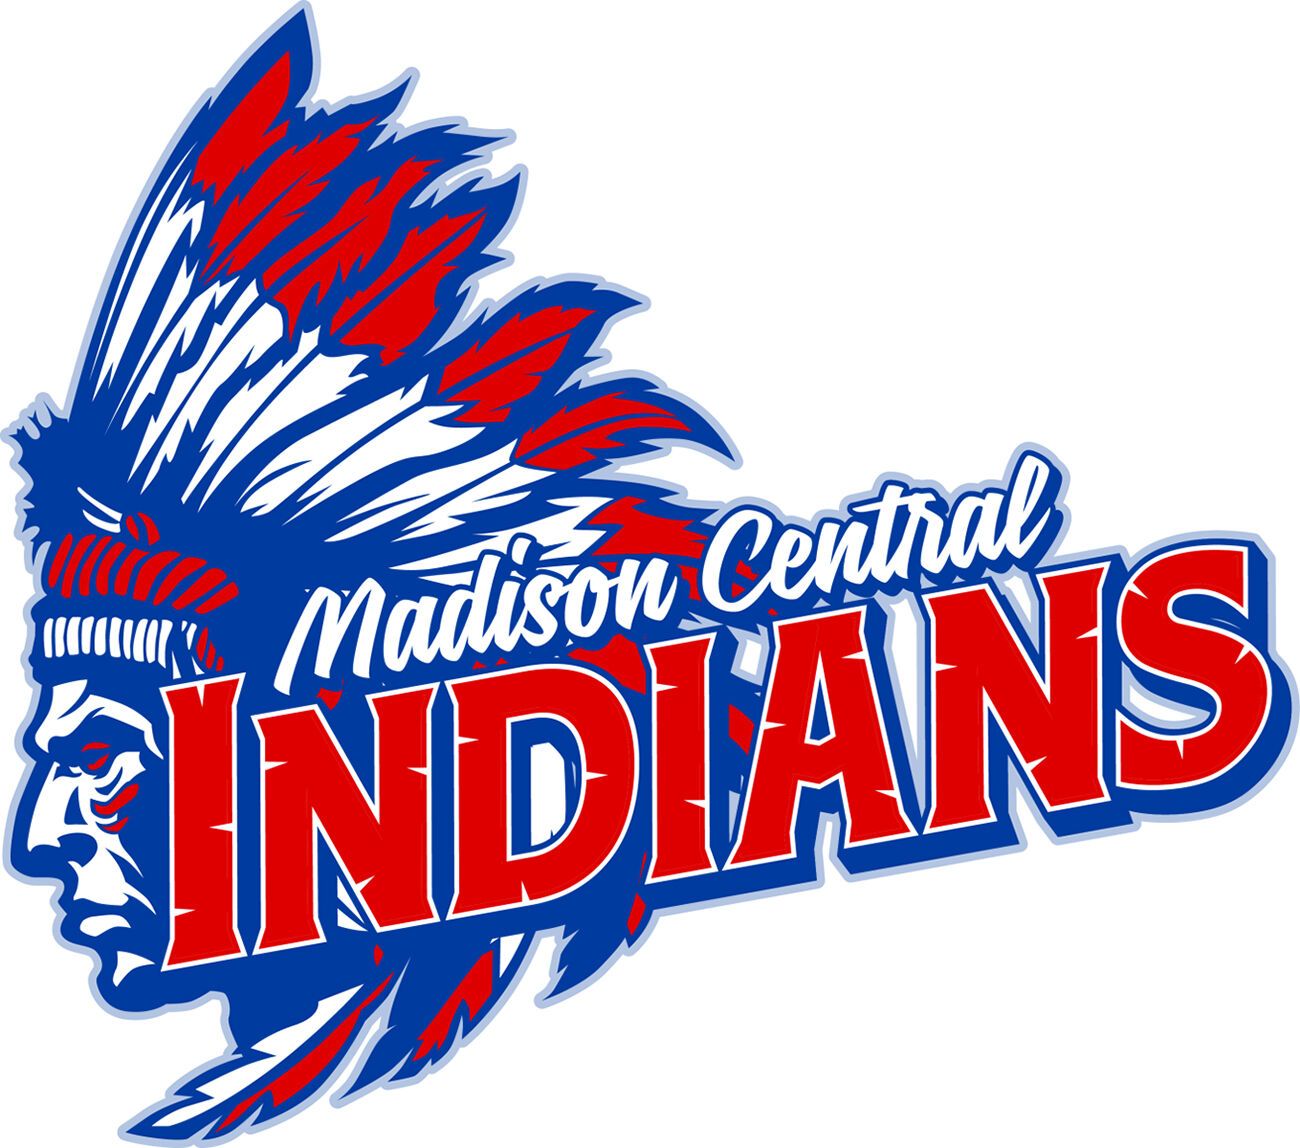 Madison Central’s Landon Ray Scores Team-Best 12 Points in Defeat to South Laurel; Berea’s Abbigail Beard Nets 22 Points in Loss to Paul Laurence Dunbar